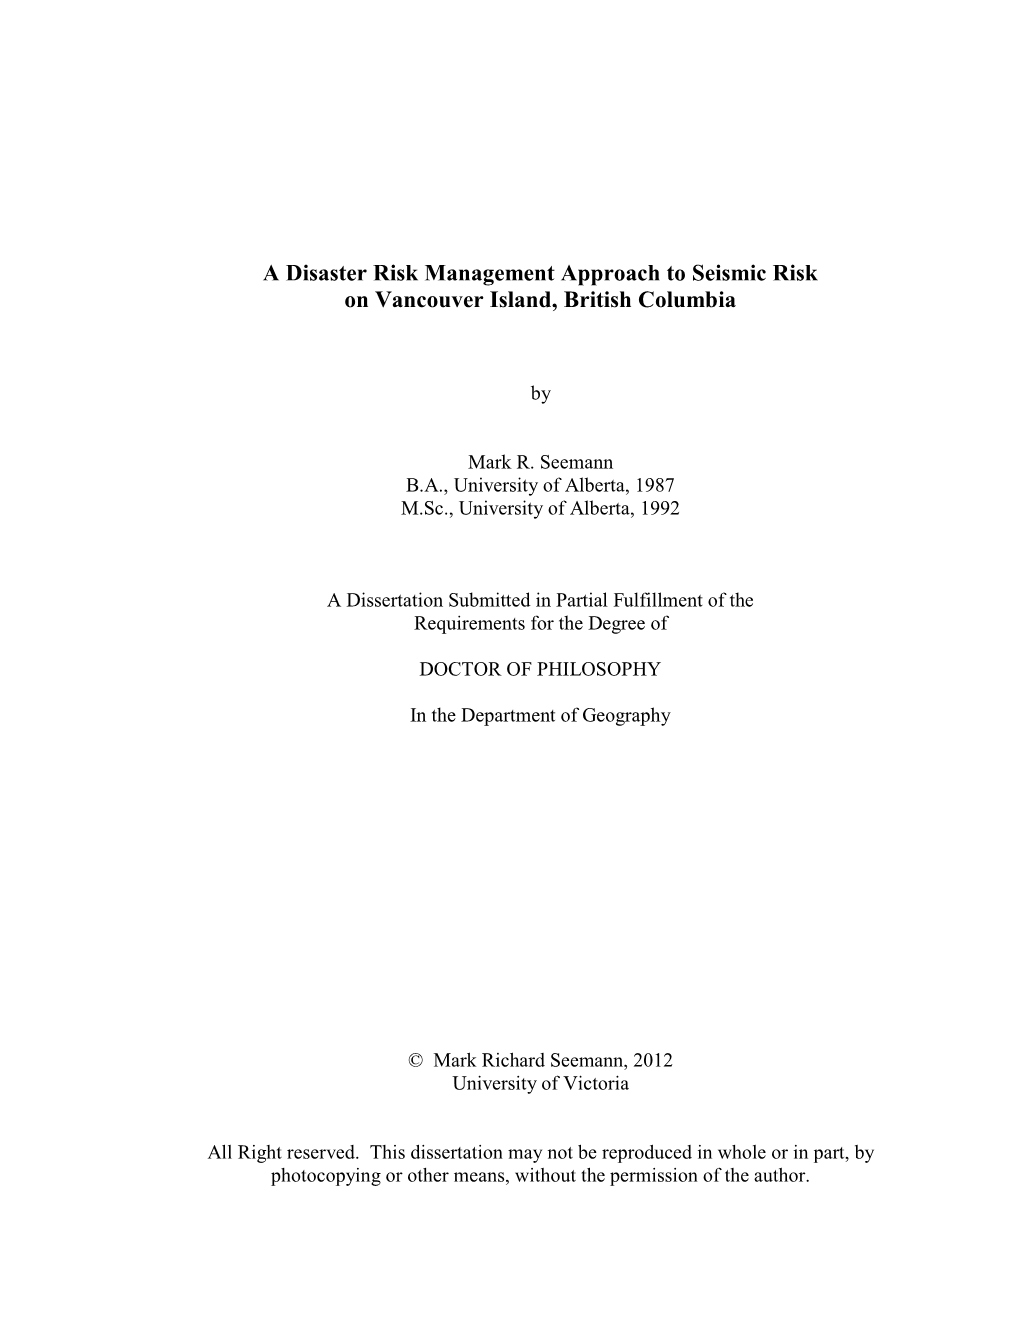 A Disaster Risk Management Approach to Seismic Risk on Vancouver Island, British Columbia